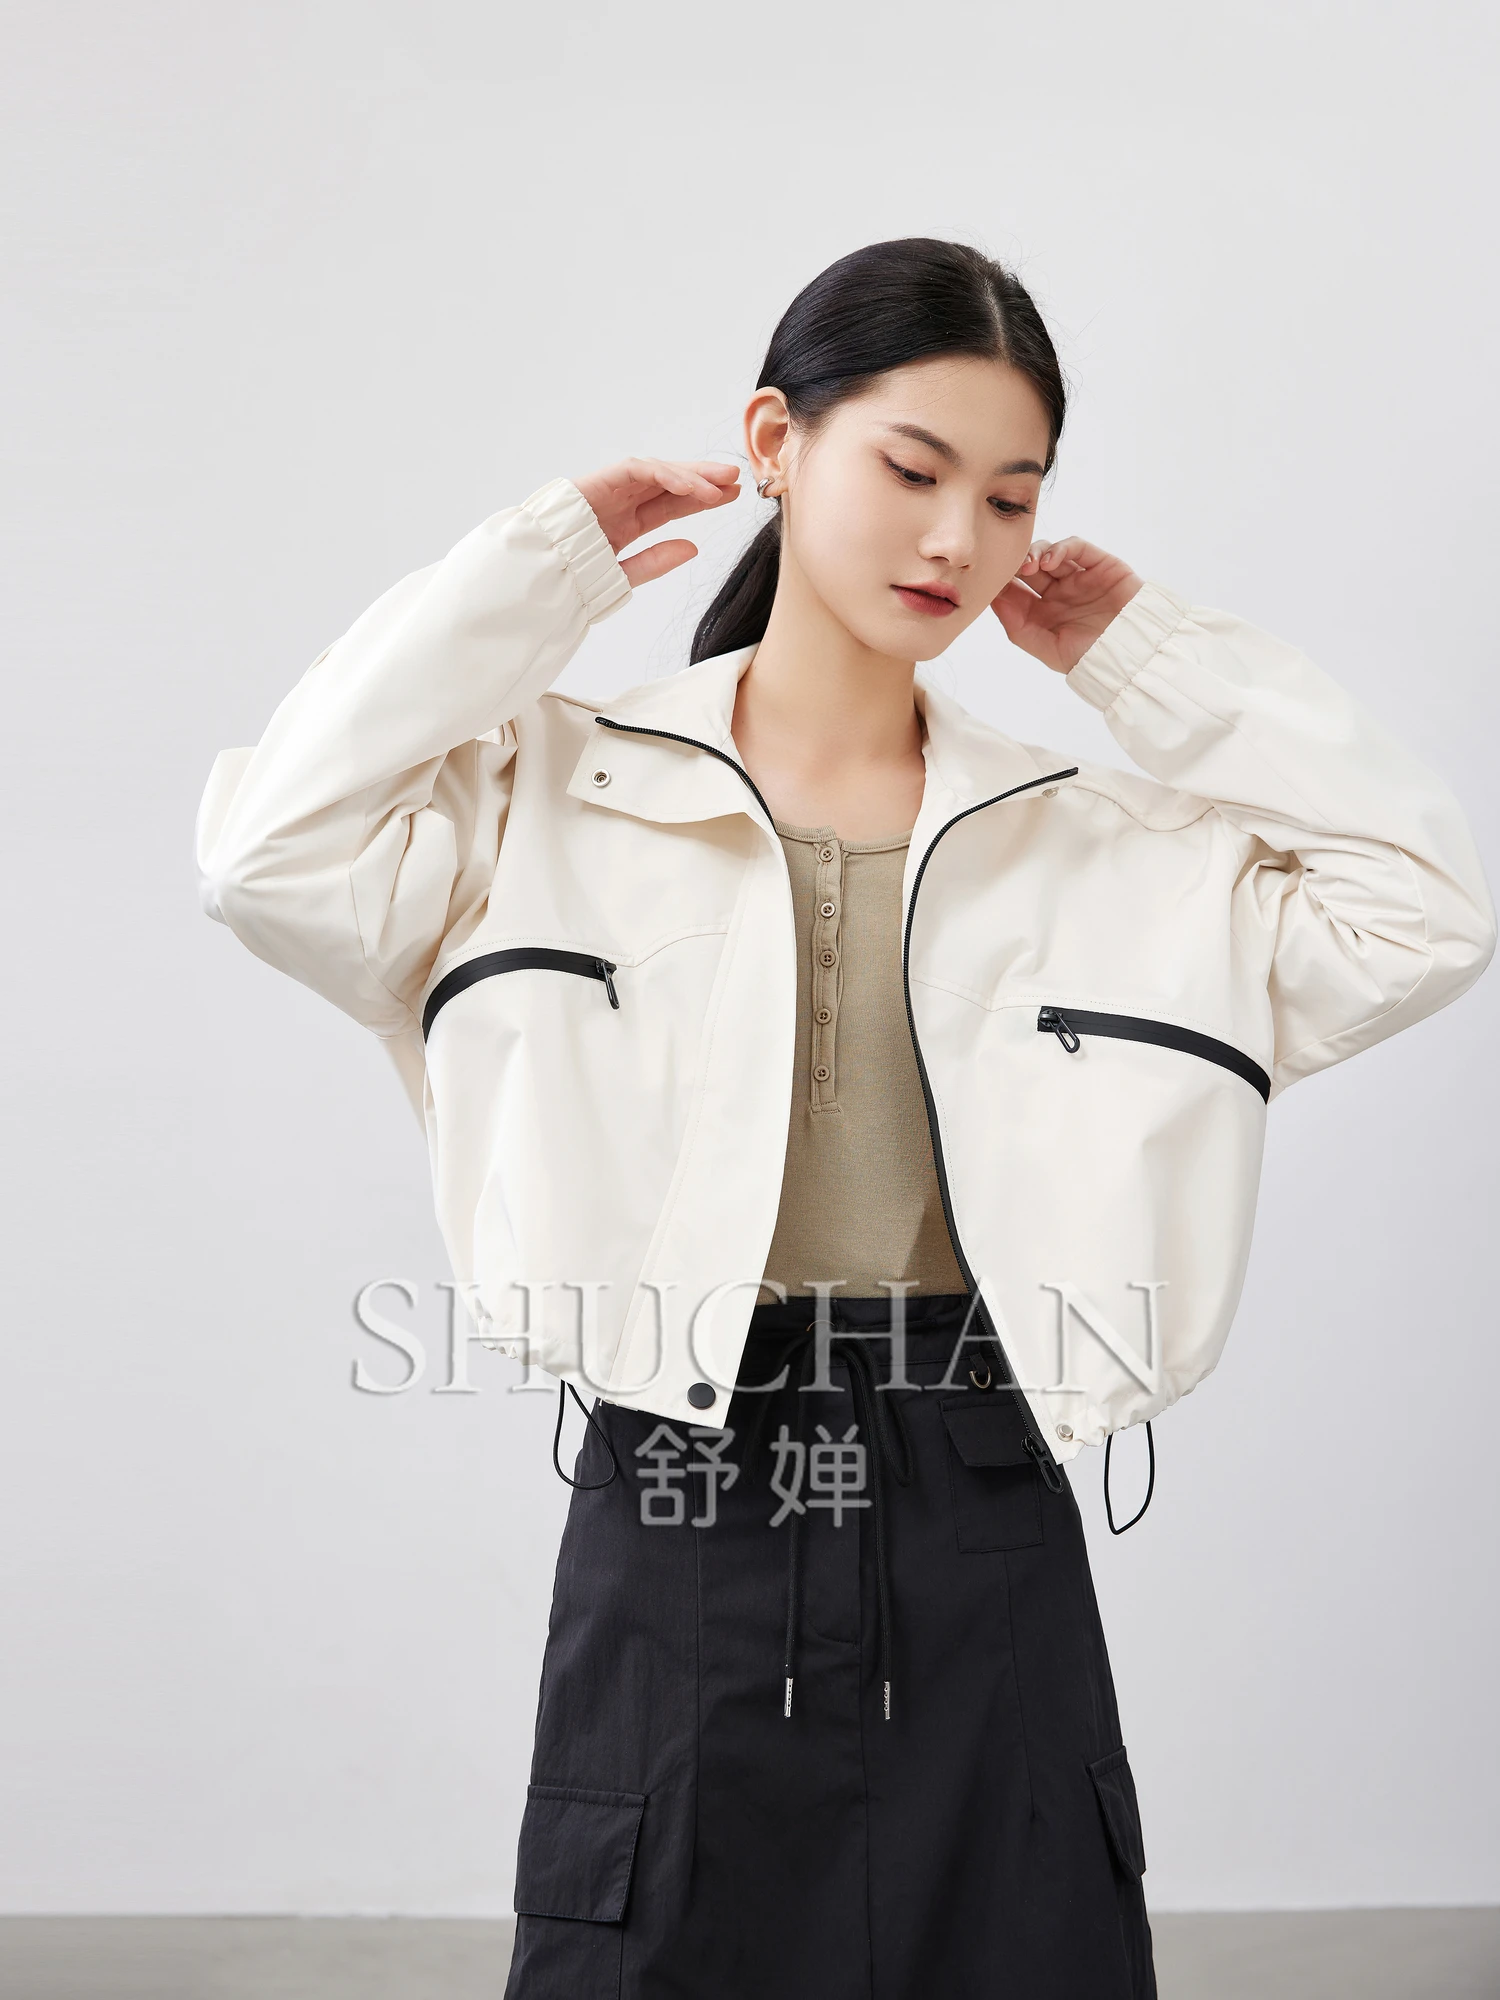 SHUCHAN New 2024 Spring Summer Waterproof and Windproof Women Jacket  Polyester  Zippers  Casacos Femininos Inverno shuchan argyle thin summer casacos femininos inverno 2023 high street polyester fiber autumn winter quilted jackets coat